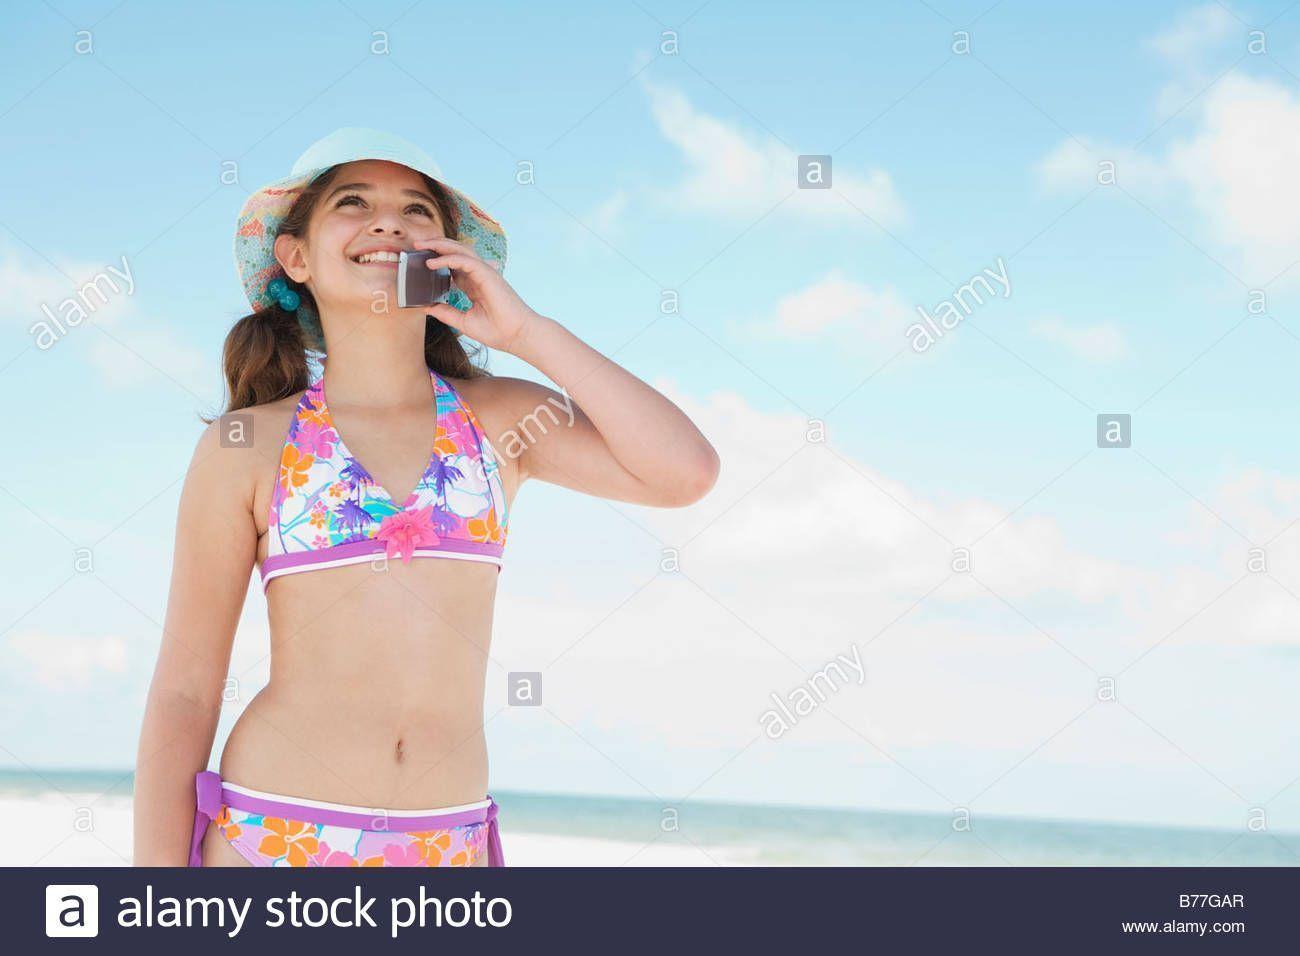 Bikini pictures to cell phone